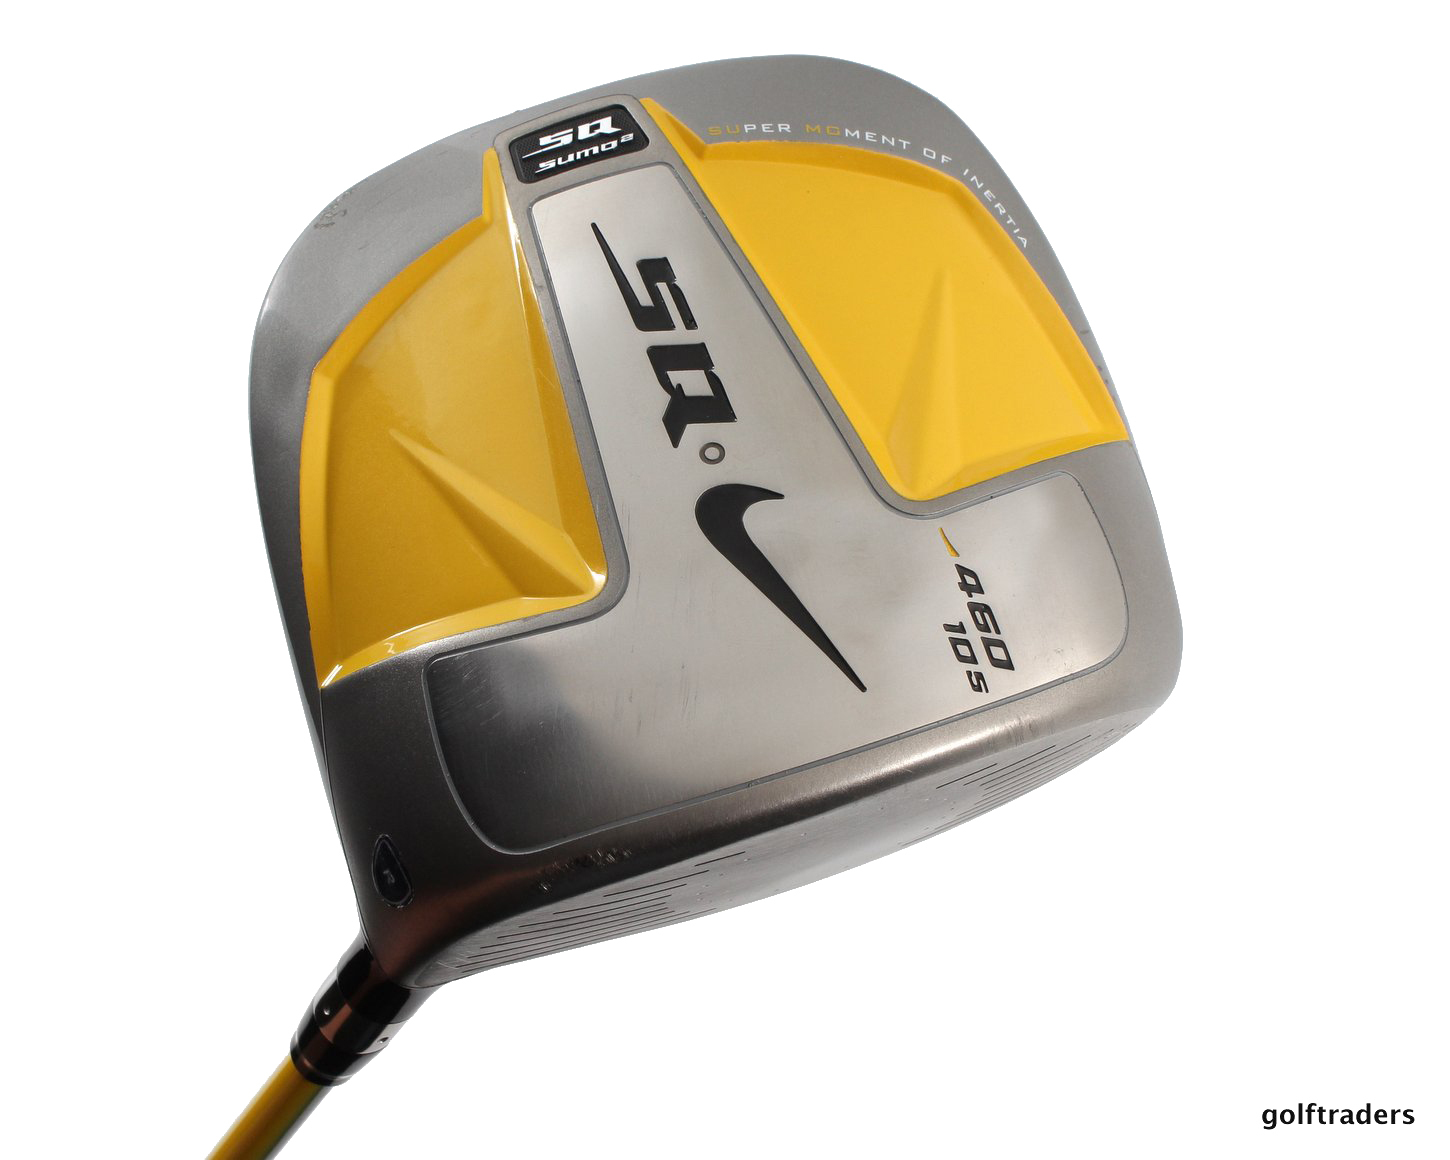 nike sumo 5900 driver for sale